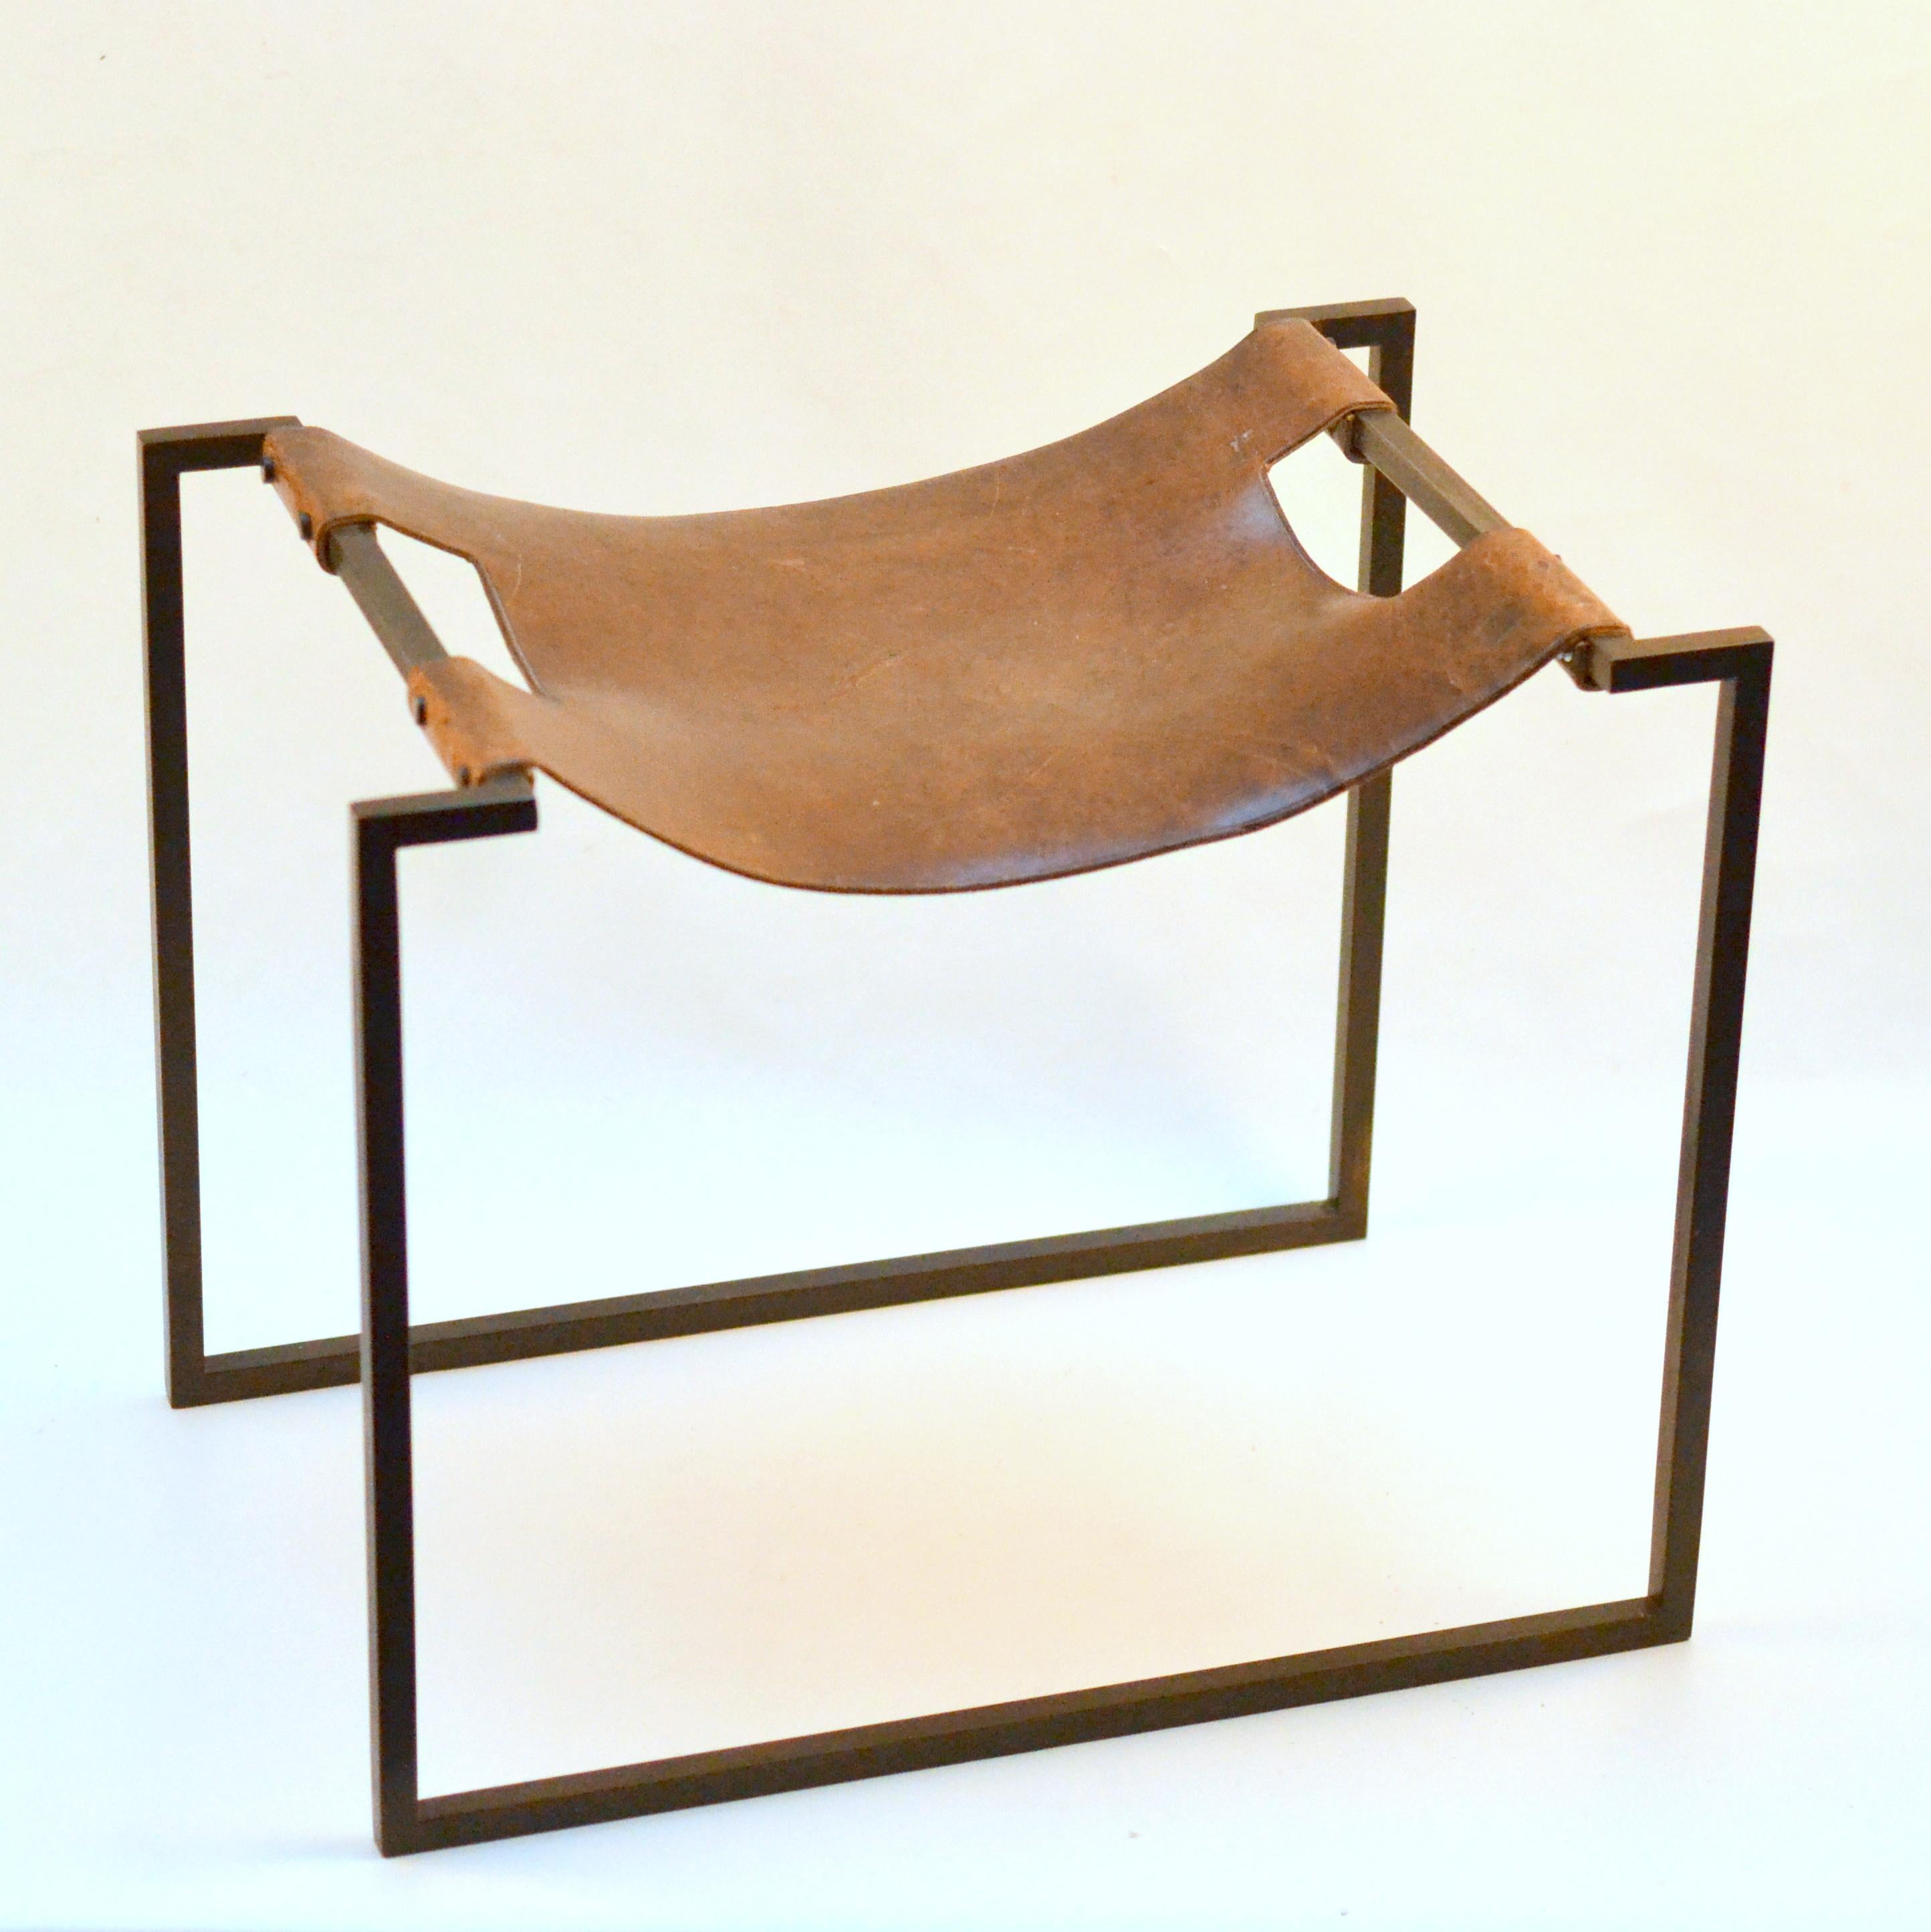 Hand forged stool was probably produced in the 1960's, where its construction was fabricated by cleverly using right angled iron bar for strength and minimal design. The hide leather loops over the ‘U’ shaped arms of the seat to form a sling and is